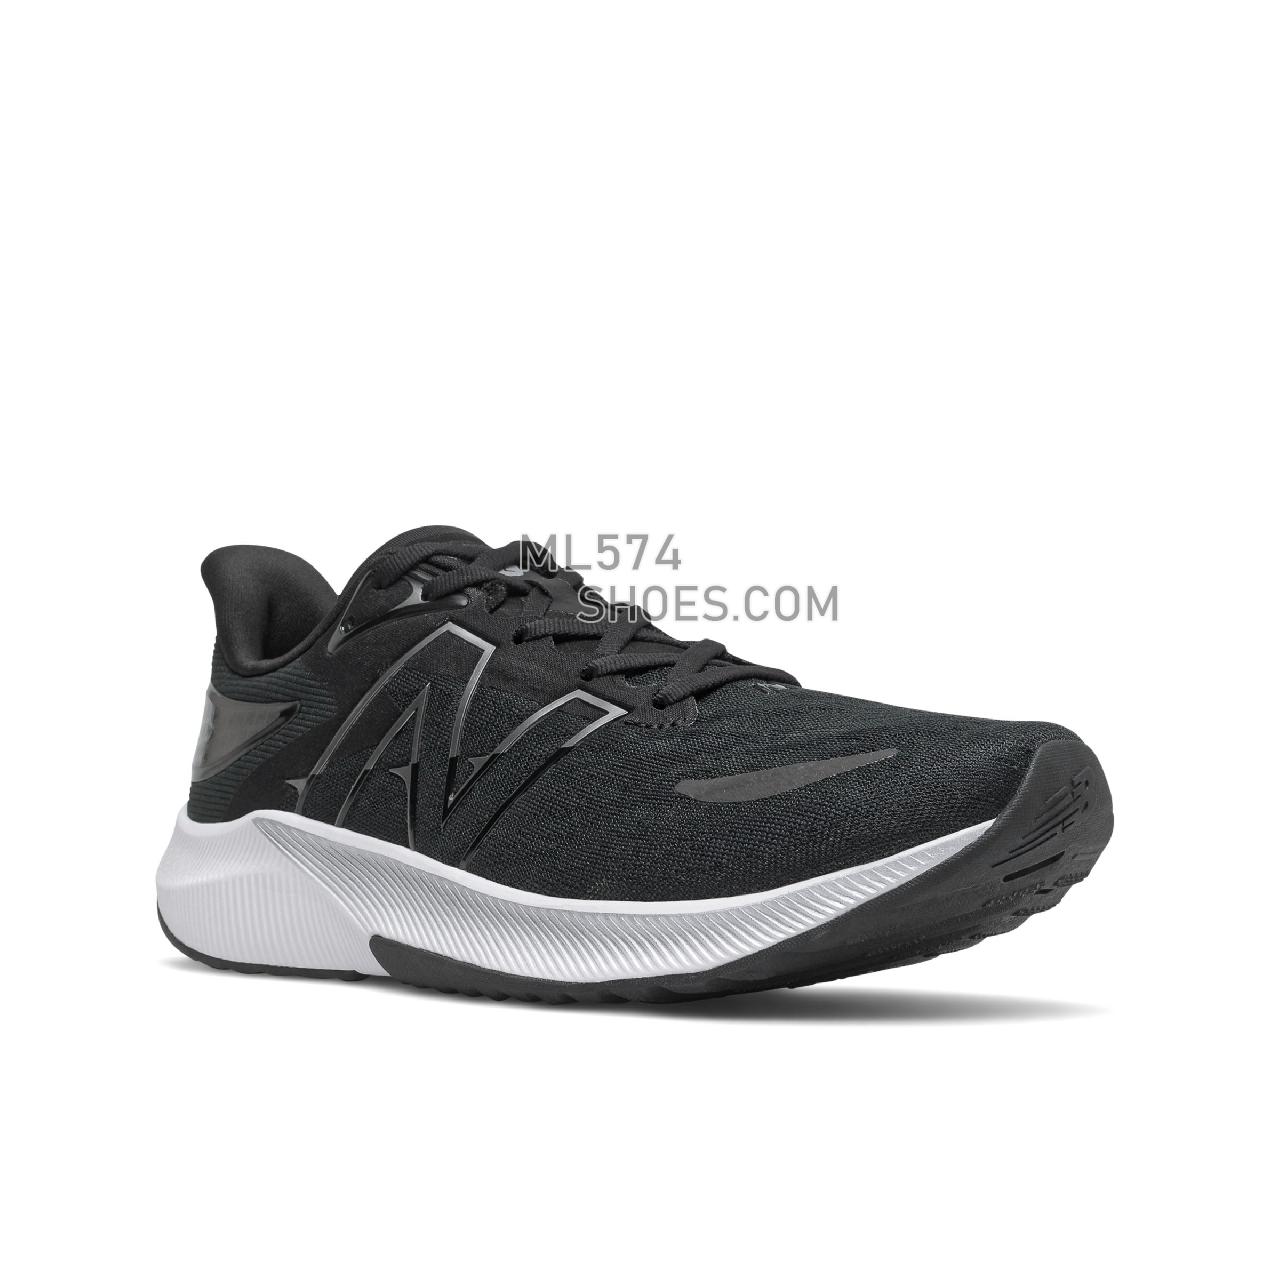 New Balance FuelCell Propel v3 - Men's Neutral Running - Black with White - MFCPRLK3